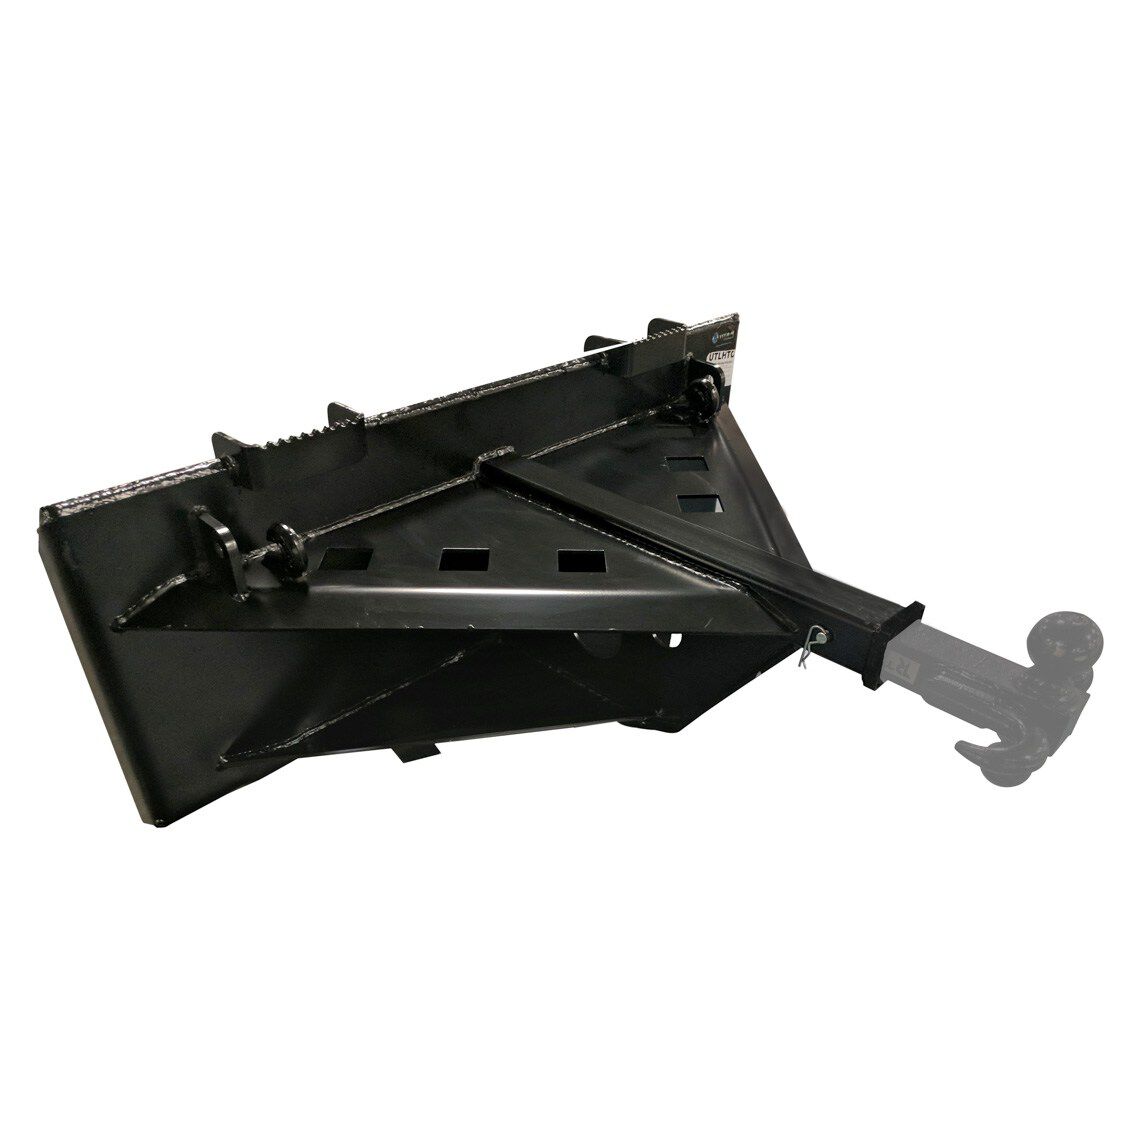 ES Hitch Plate Trailer Mover Skid Steer quick attach LOCAL PICK-UP 